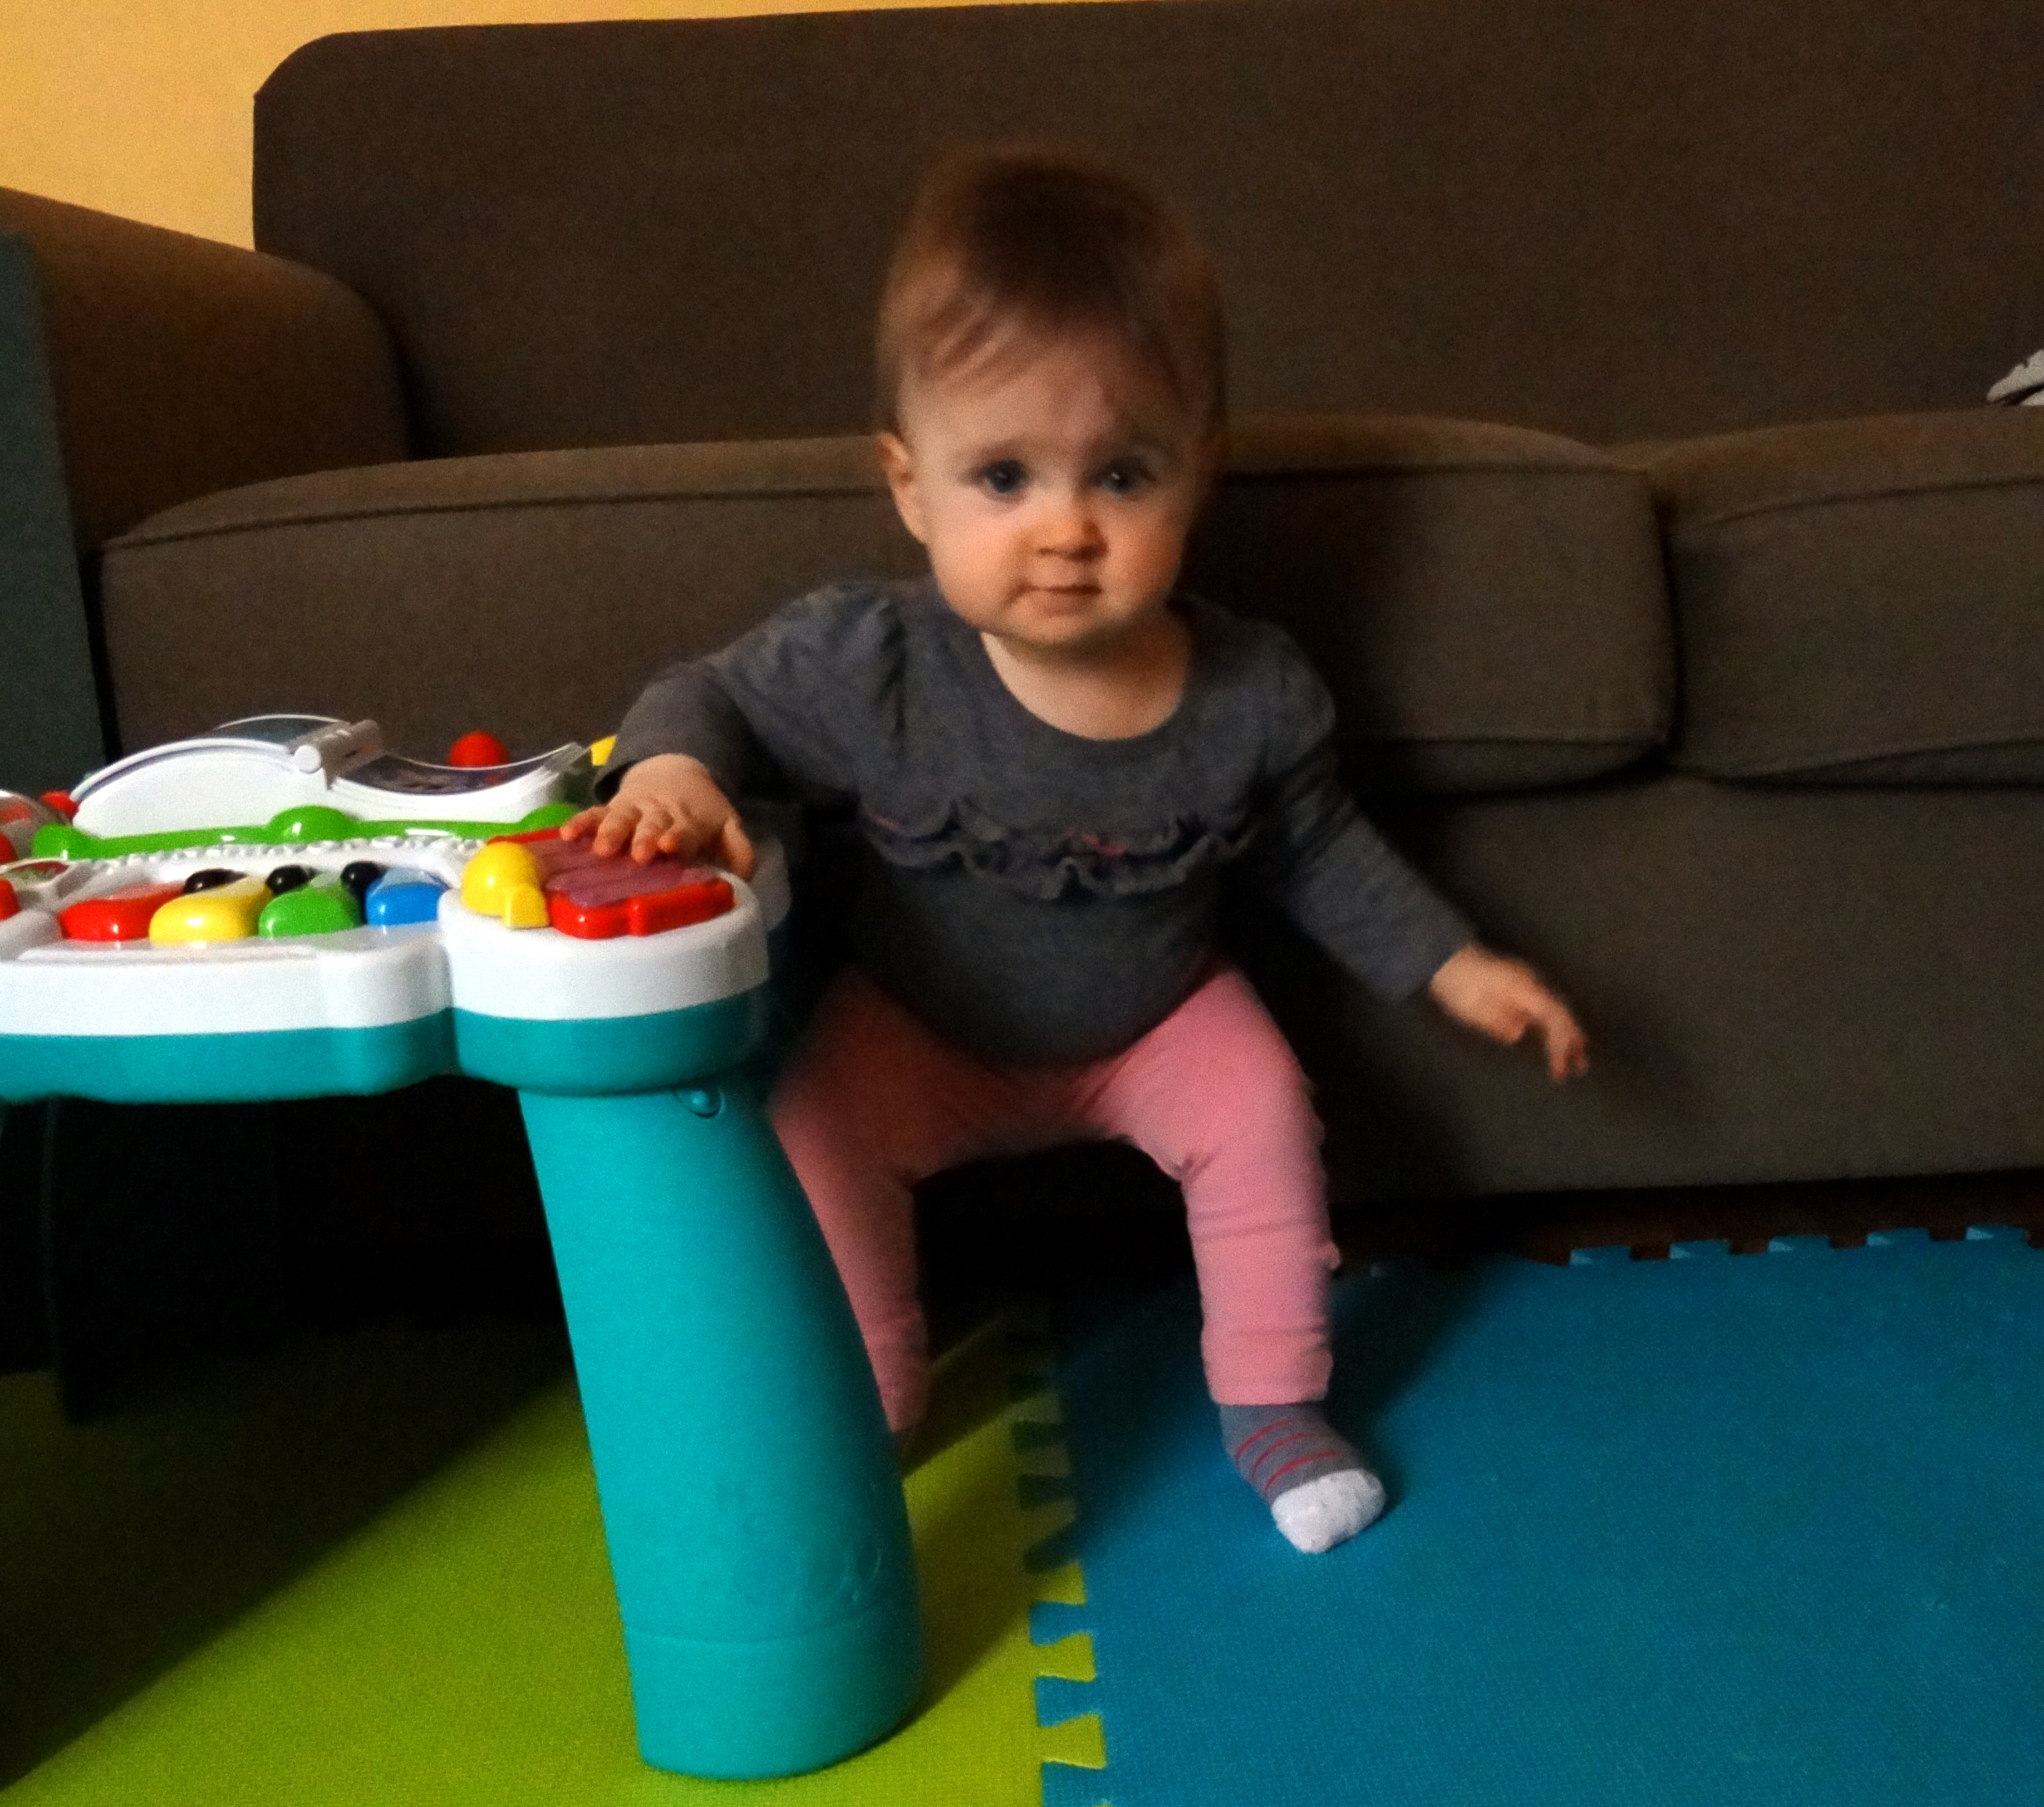 Baby trying to sit back down from standing position